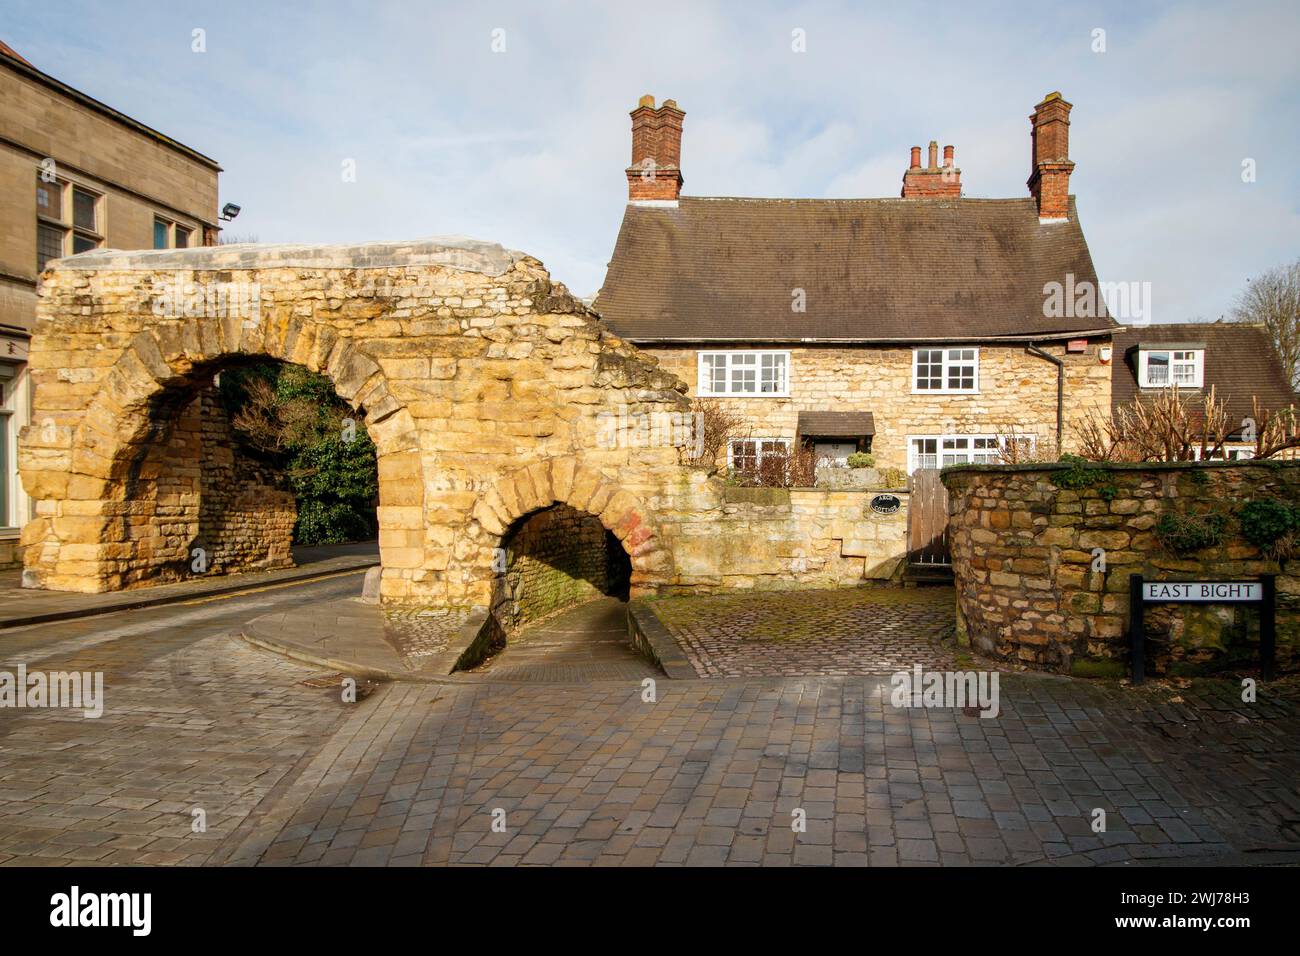 The Newport Arch and the road leading into Bailgate the upper area of Lincoln. Newport Arch is a 3rd-century Roman gate in the city of Lincoln, Lincolnshire. It is a Scheduled monument and Grade I listed building and is reputedly the oldest arch in the United Kingdom still used by traffic. Stock Photo